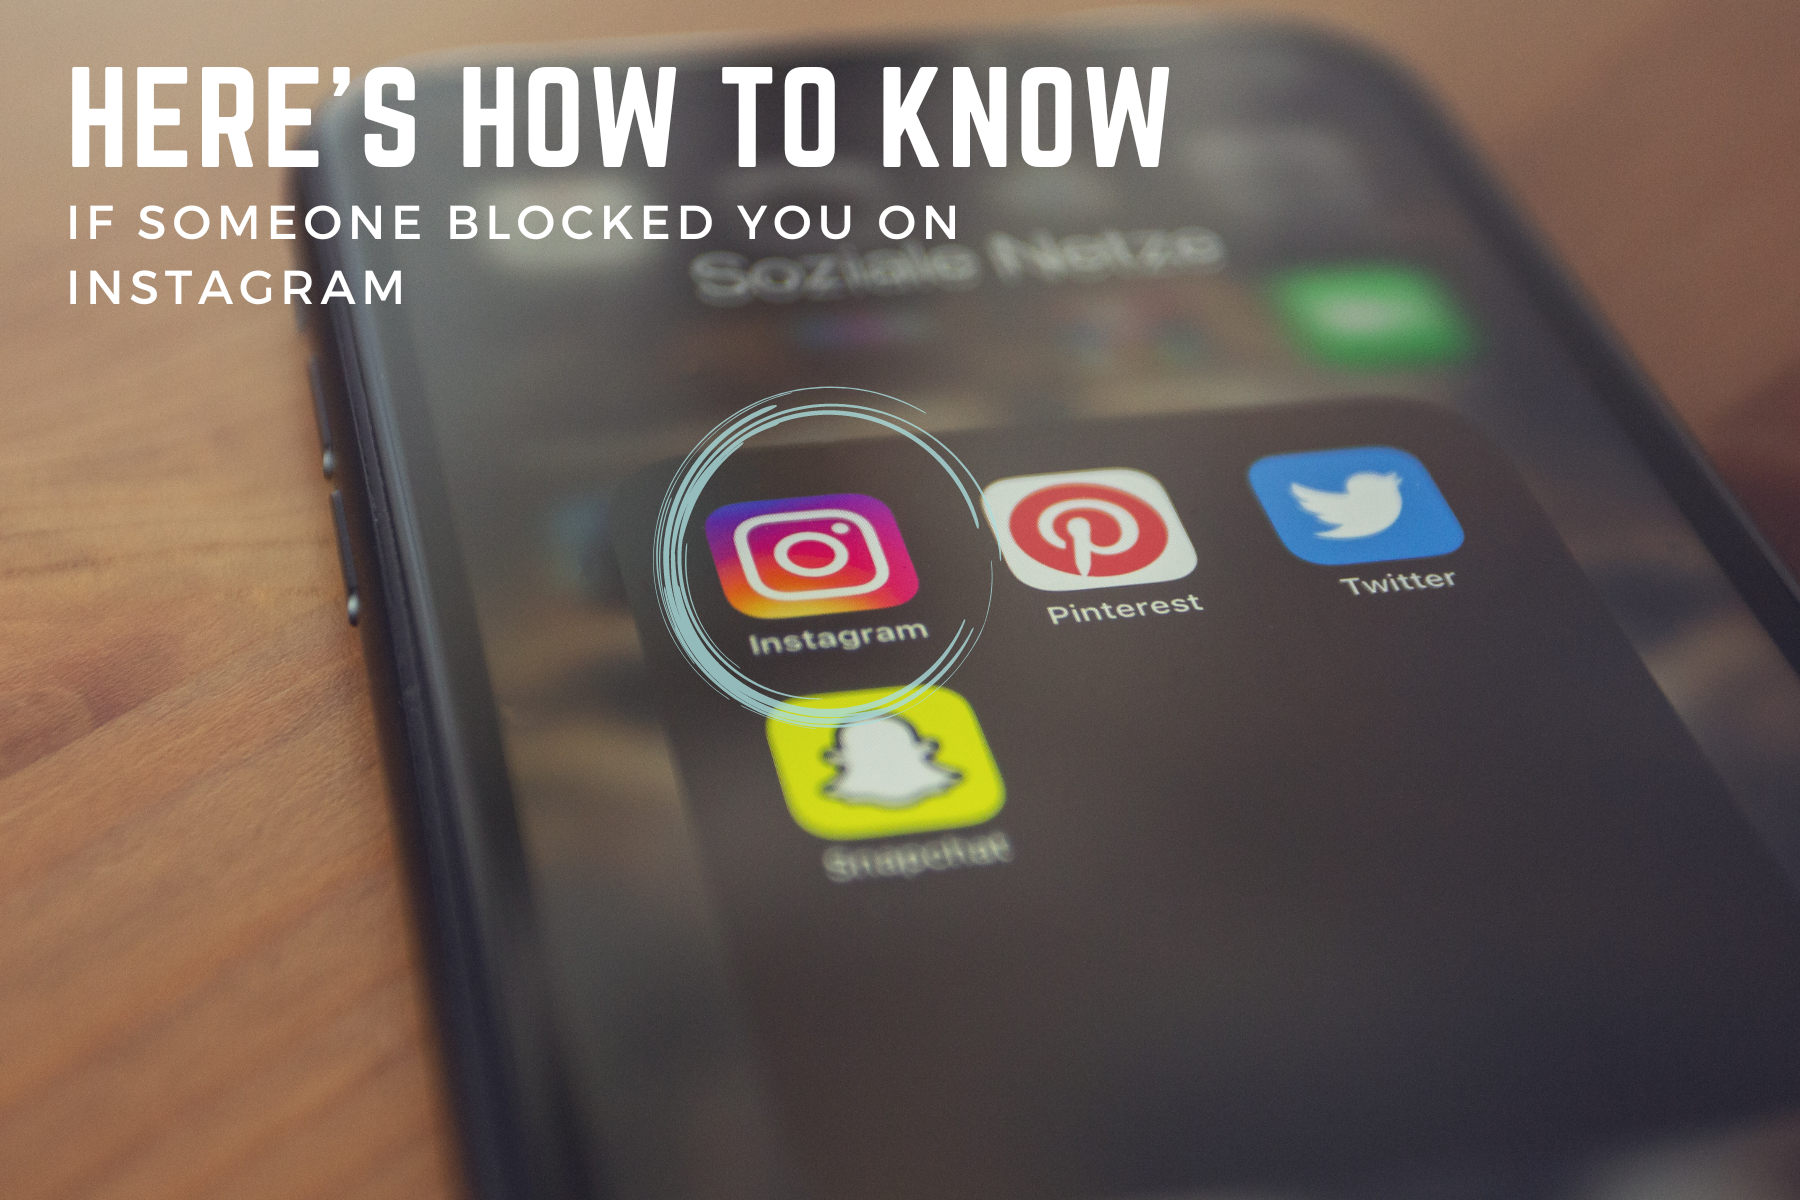 Here's How To Know If Someone Blocked You On Instagram